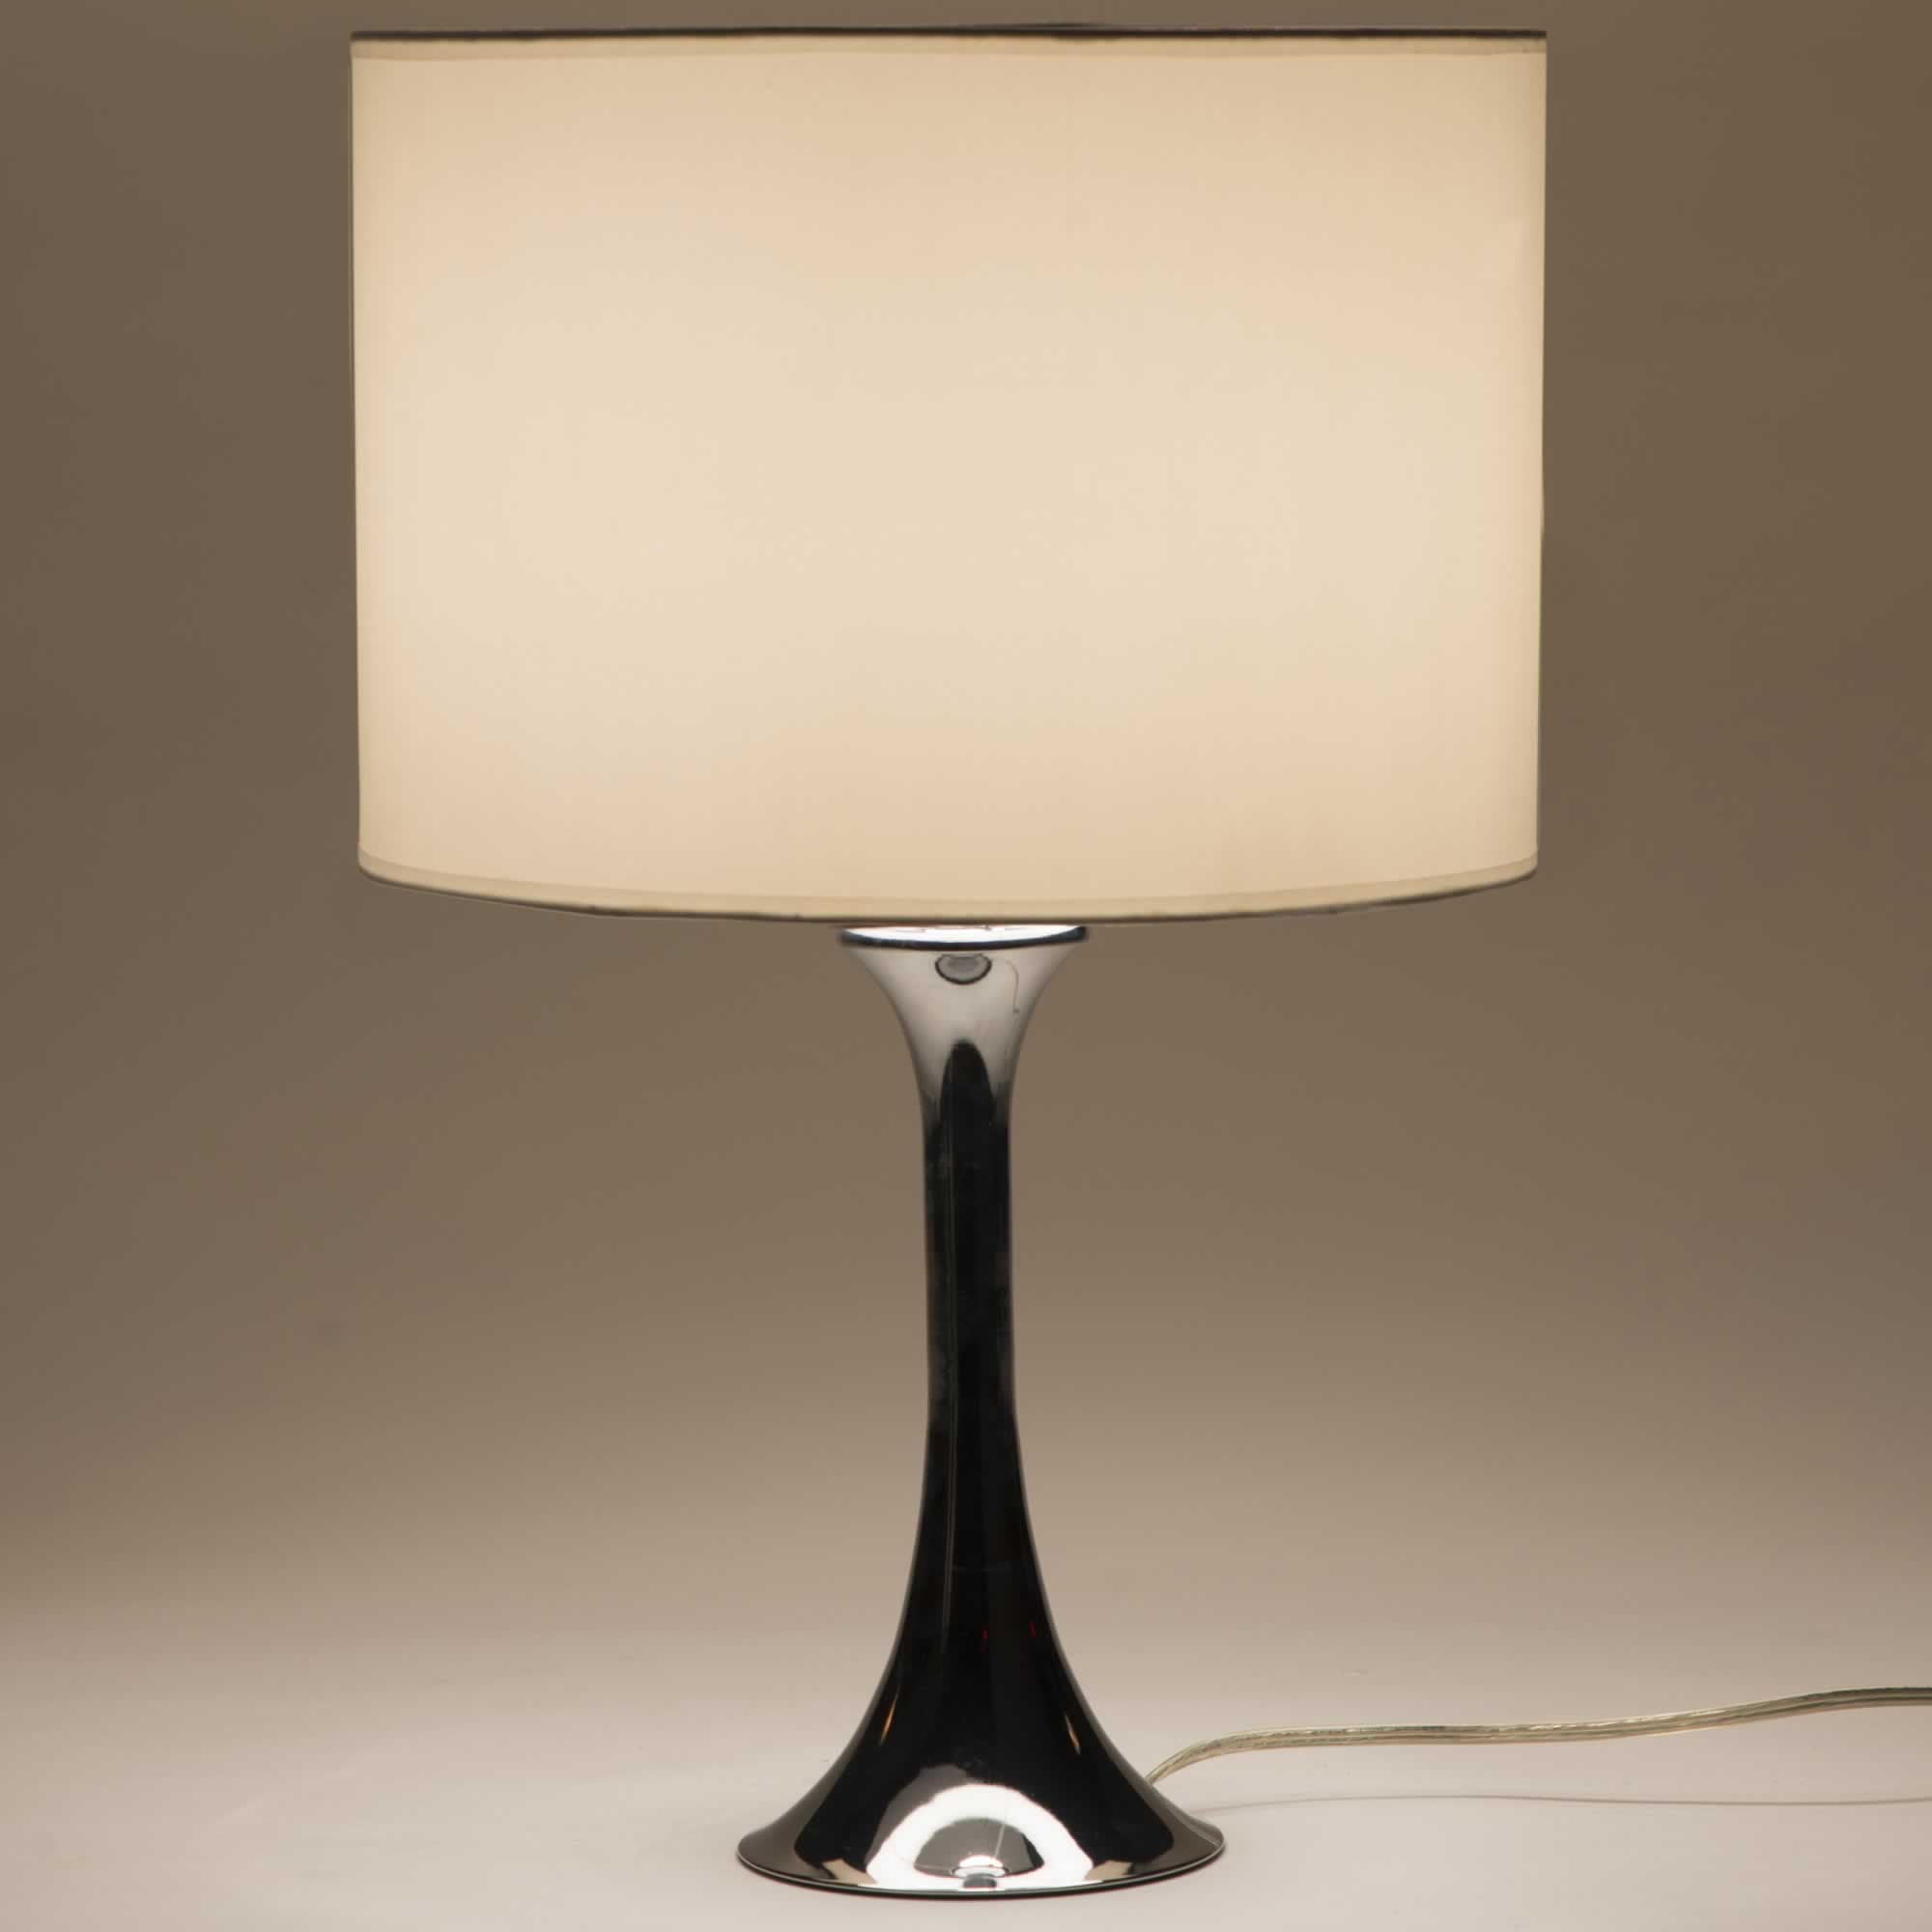 The Silver Bell Table Lamp - TL0004